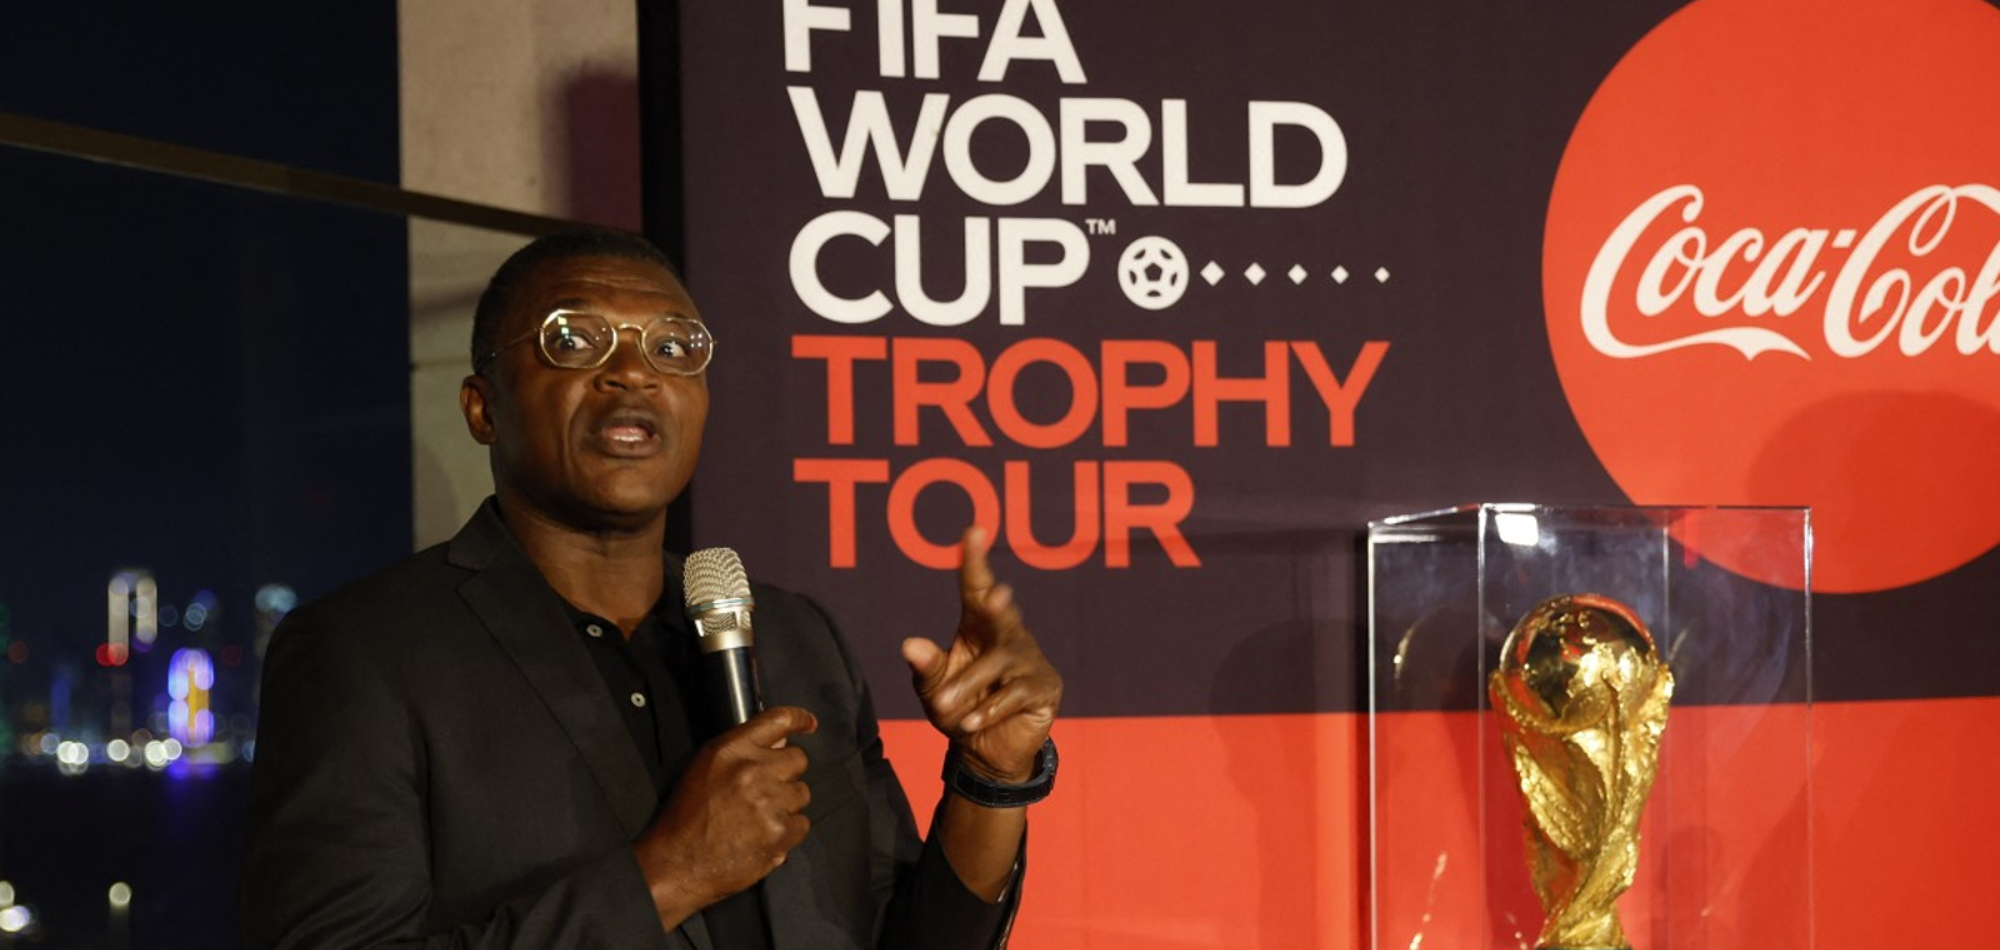 Desailly says Argentina can win World Cup, backs Qatar to reach last 16 stage